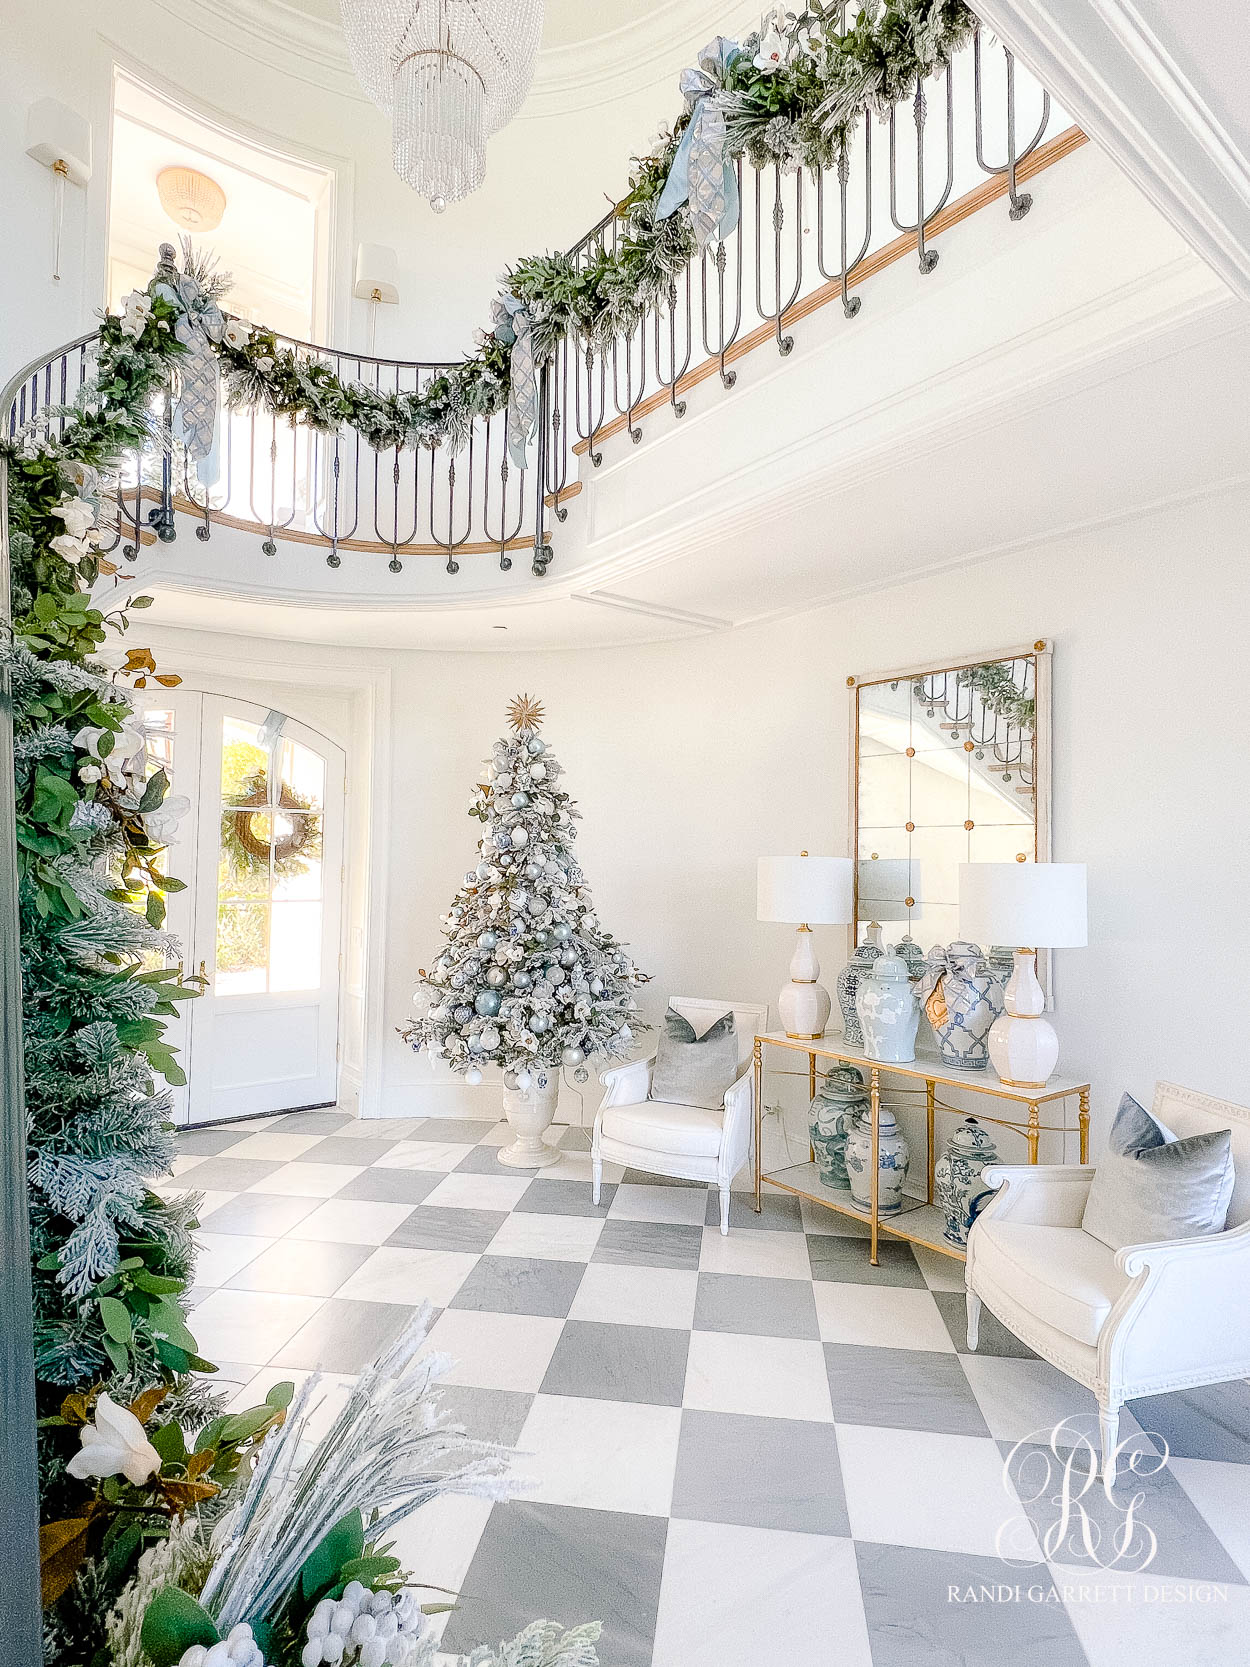 The Wren's Blue + White Christmas Entryway french checkered floors